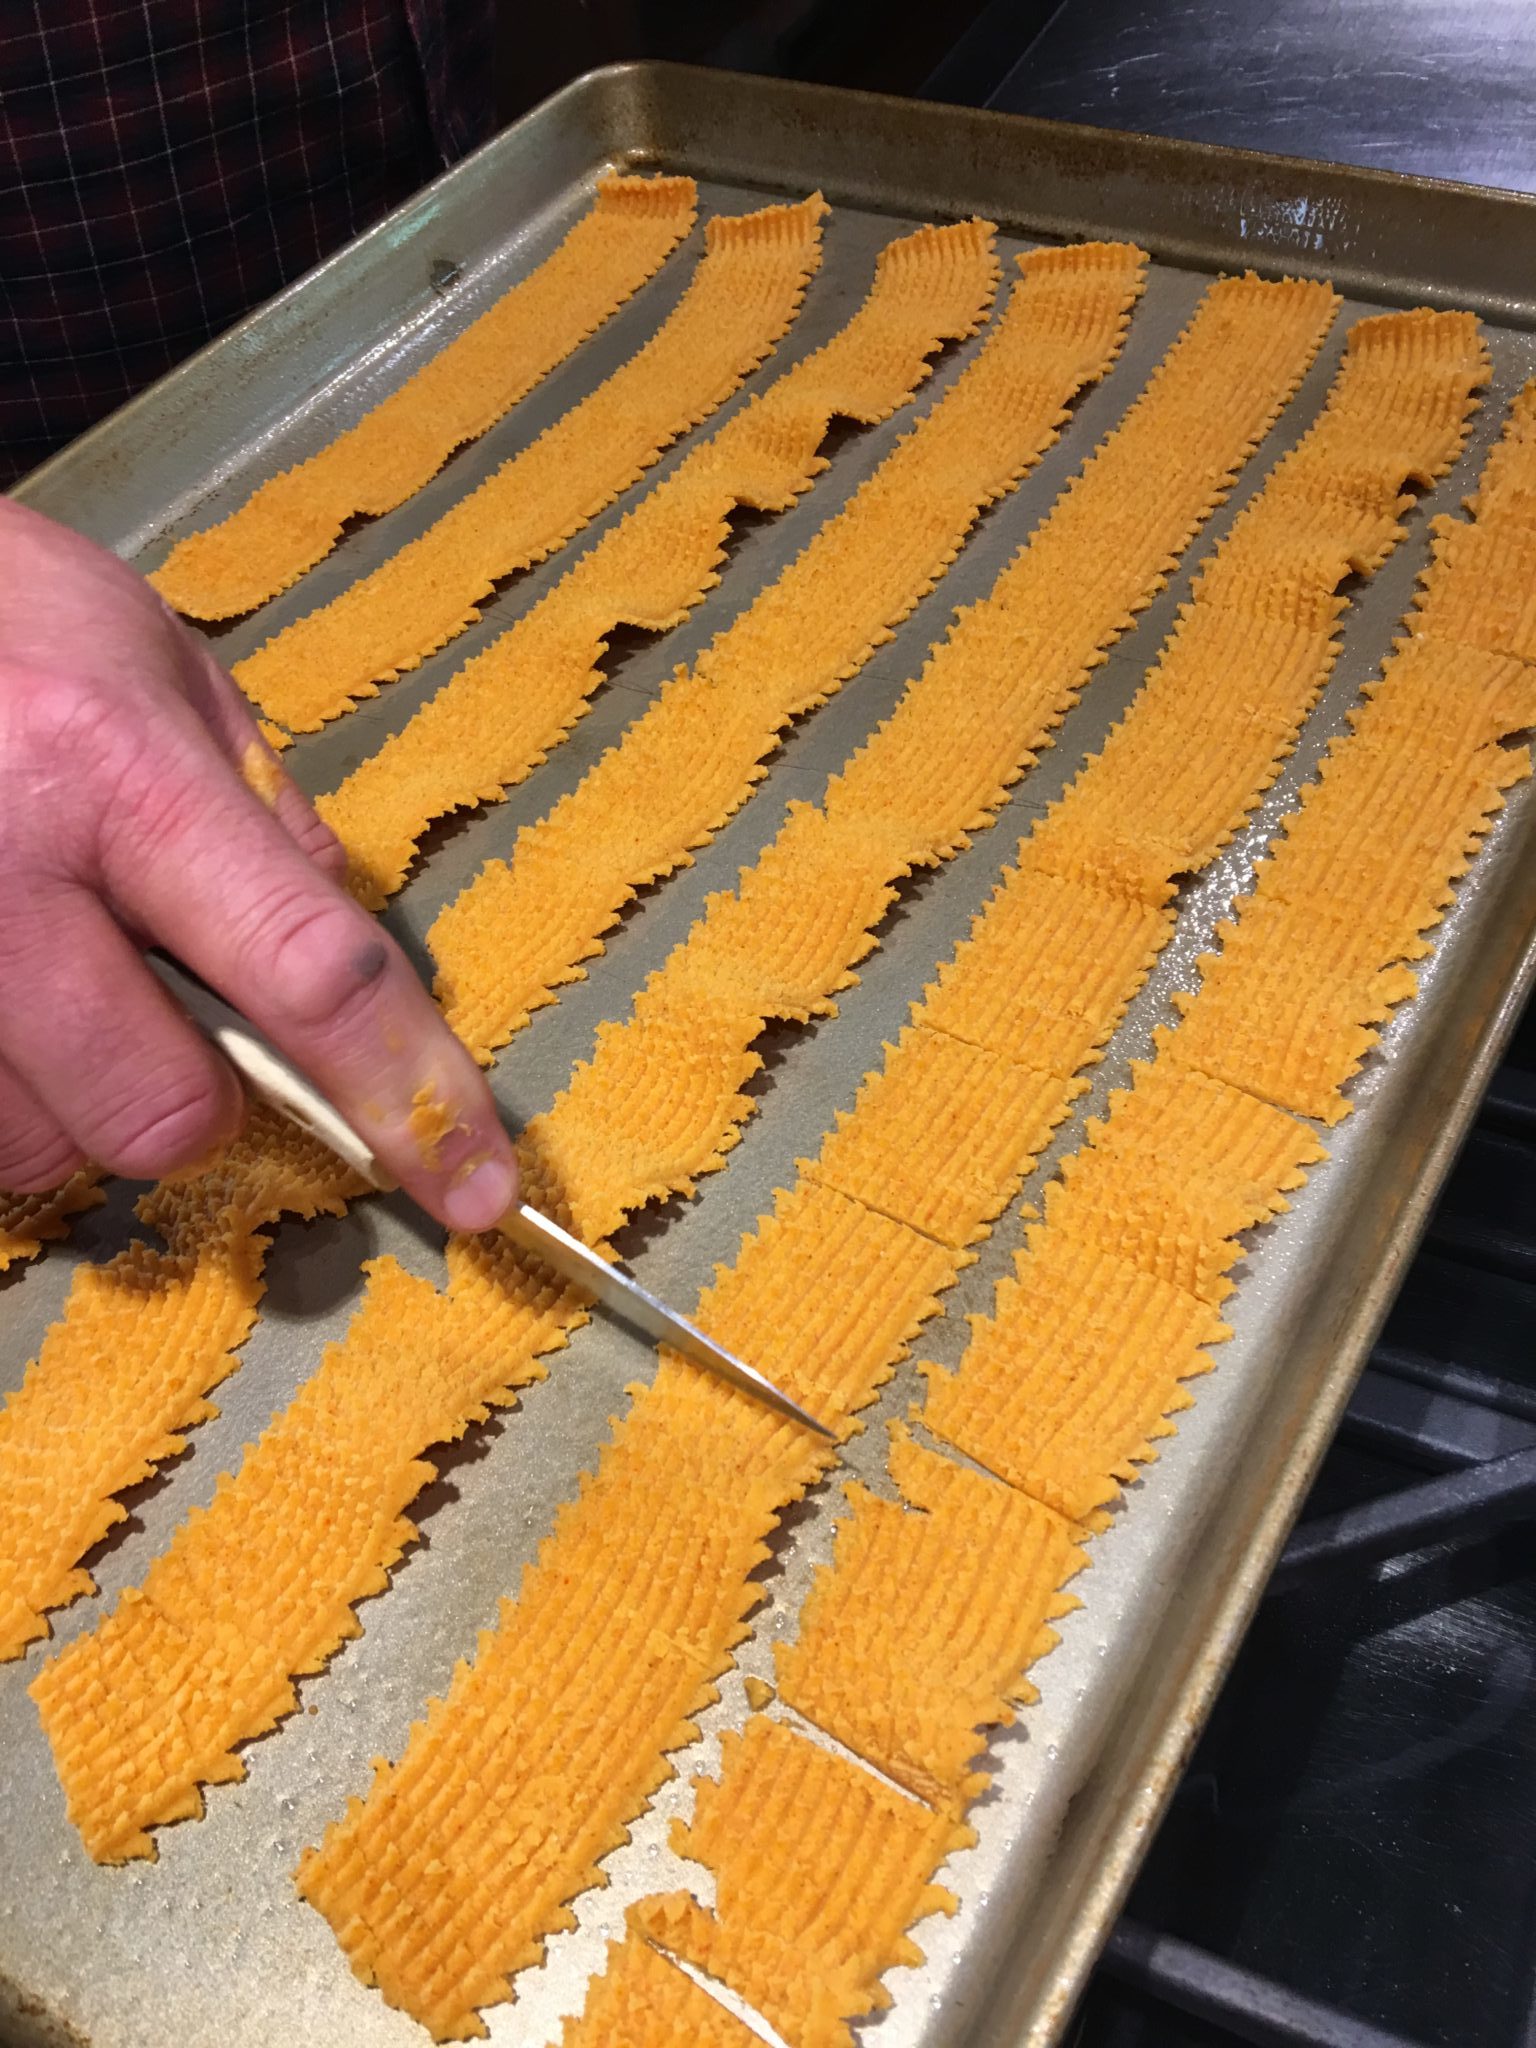 Cutting cheese crackers before putting in the oven